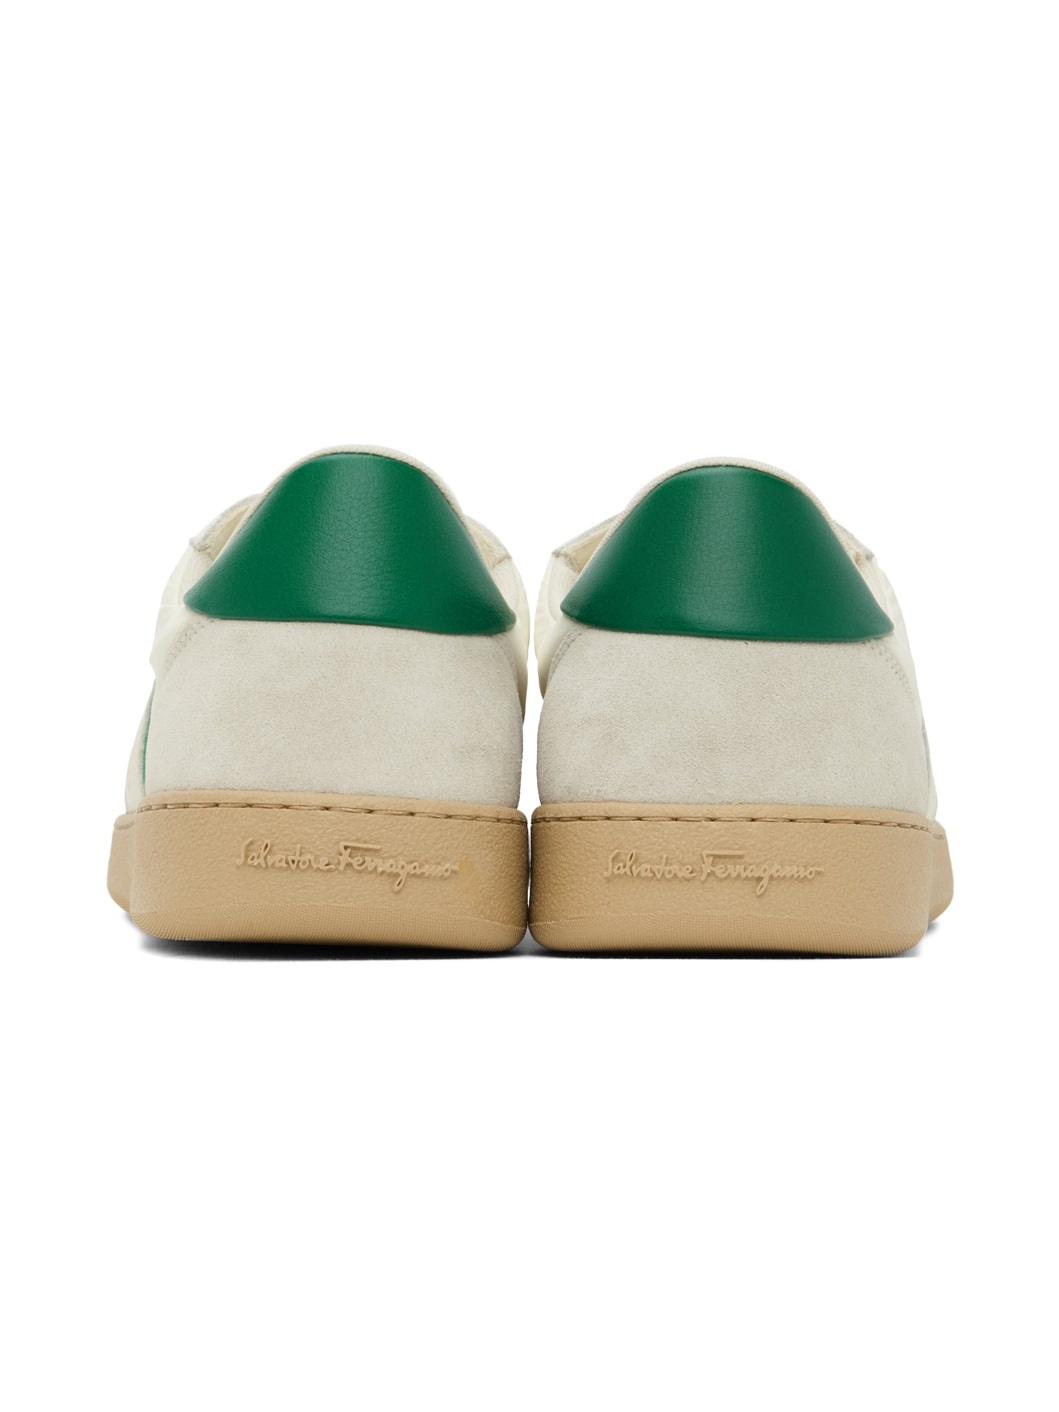 Off-White & Green Signature Low Sneakers - 2